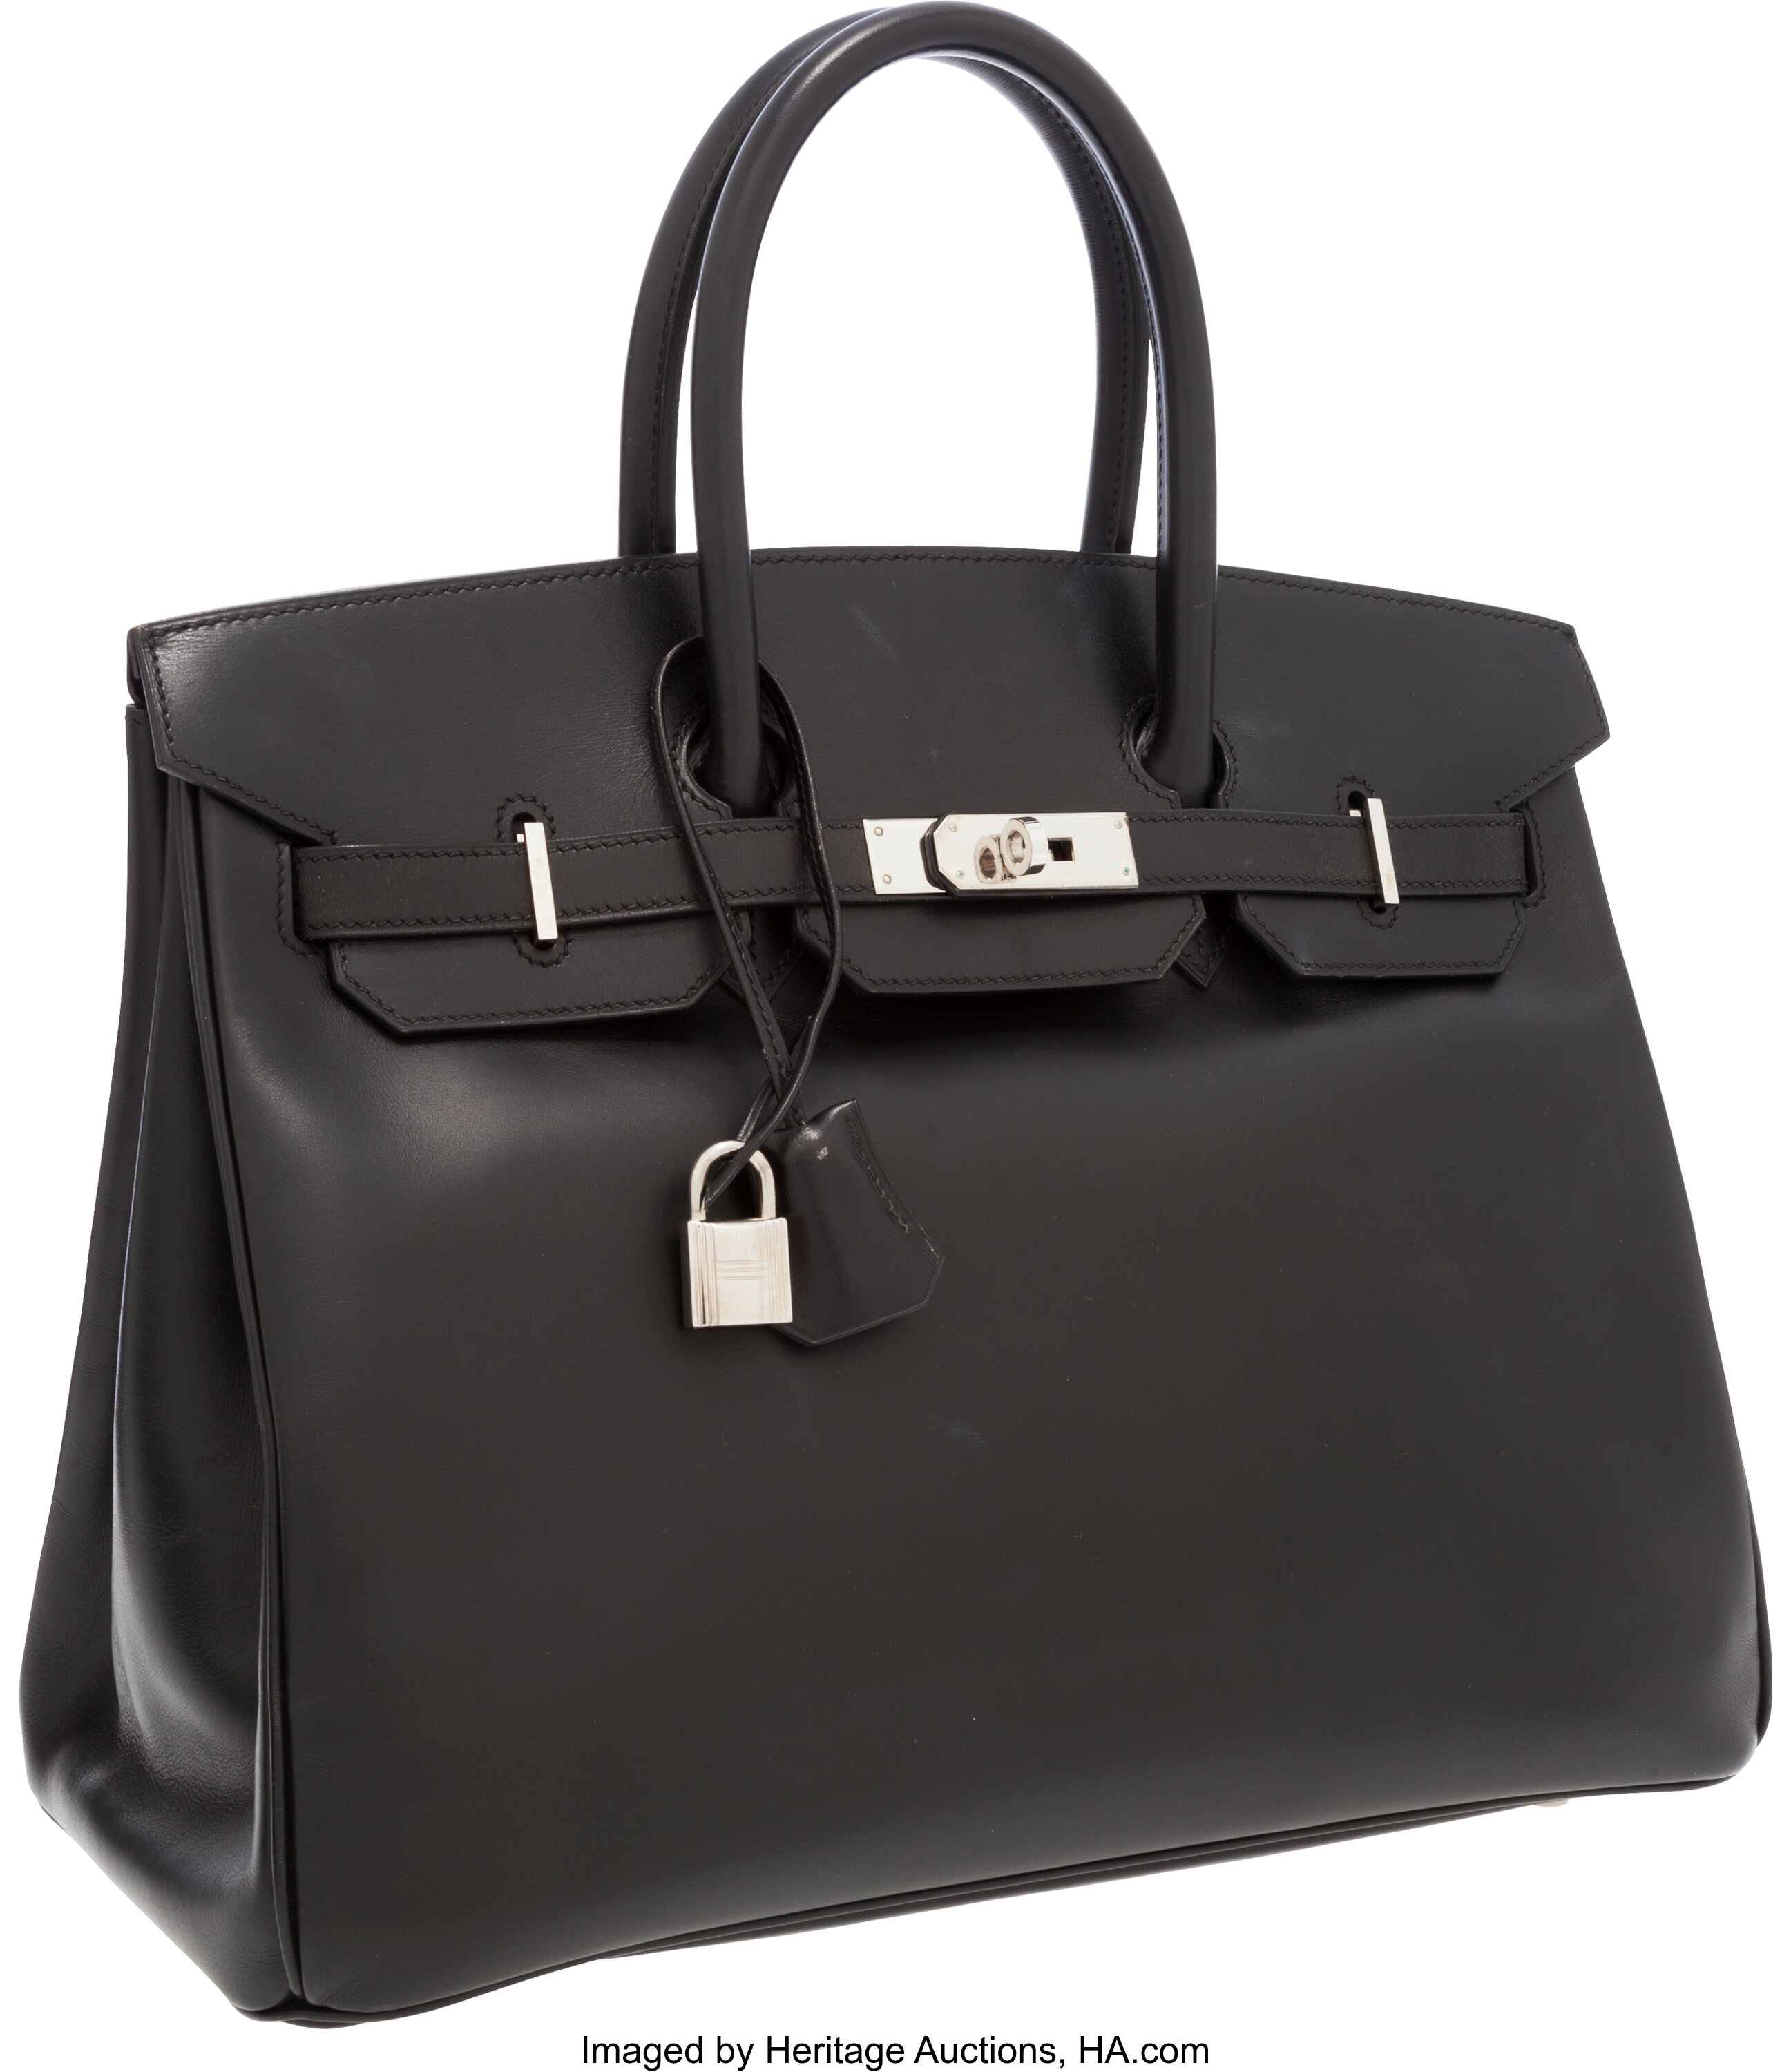 A BLACK CALF BOX LEATHER SELLIER KELLY 25 WITH PALLADIUM HARDWARE